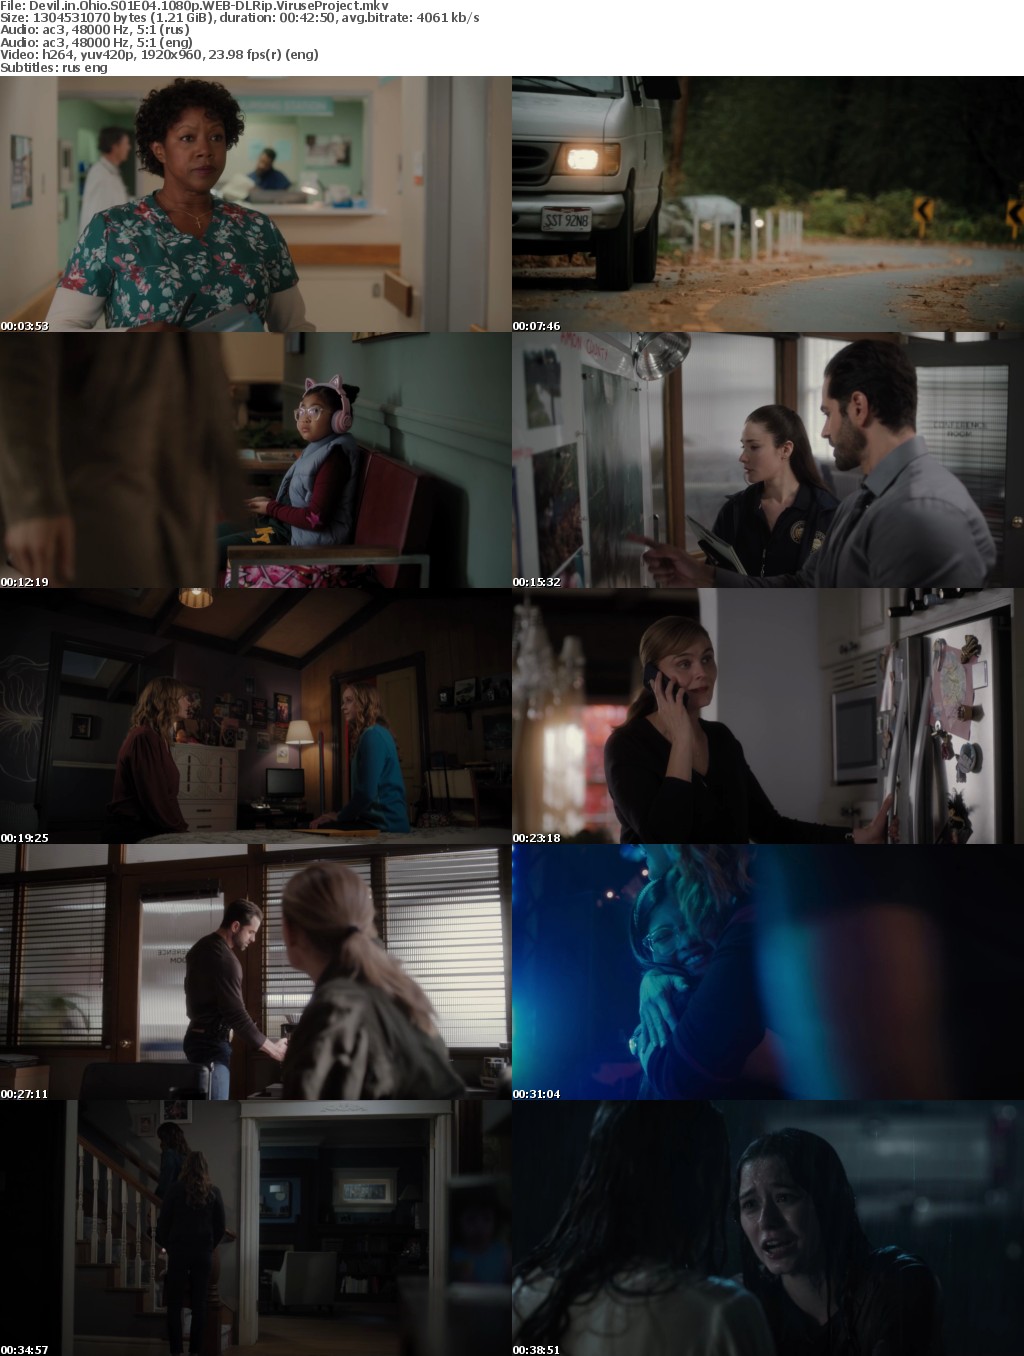 Devil in Ohio S01E01-04 (2022) Rus Eng (Rus Eng Subs) WEB-DLRip ViruseProjectDevil in Ohio S01E01-04 (2022) Rus Eng (Rus Eng Subs) 1080 WEB-DLRip ViruseProject